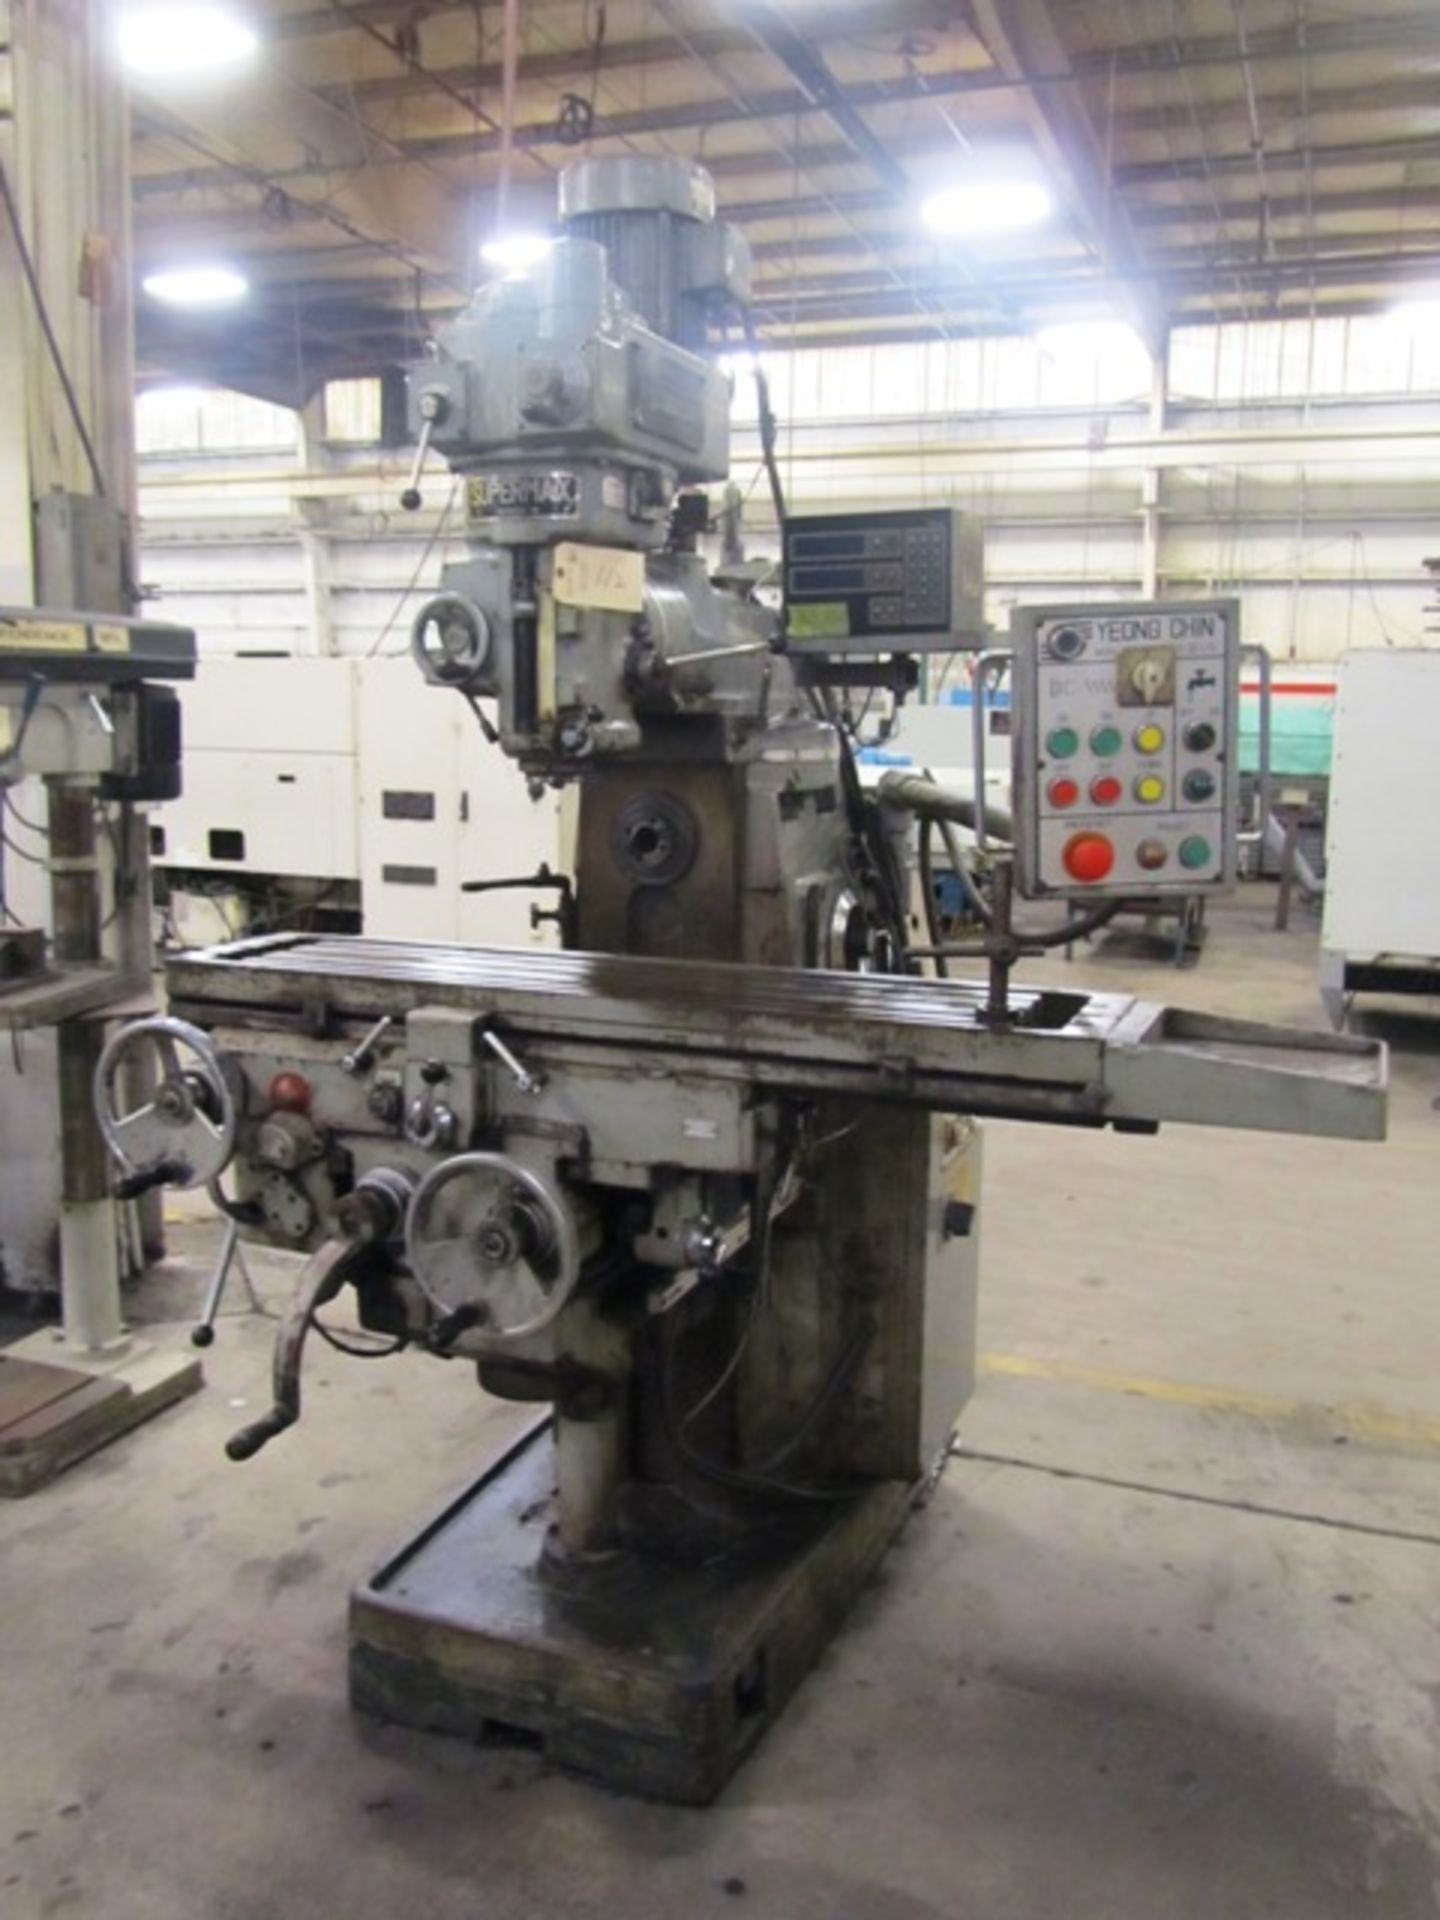 Supermax Universal Horizontal / Vertical Milling Machine with 40 Taper Vertical Spindle, 40 Taper